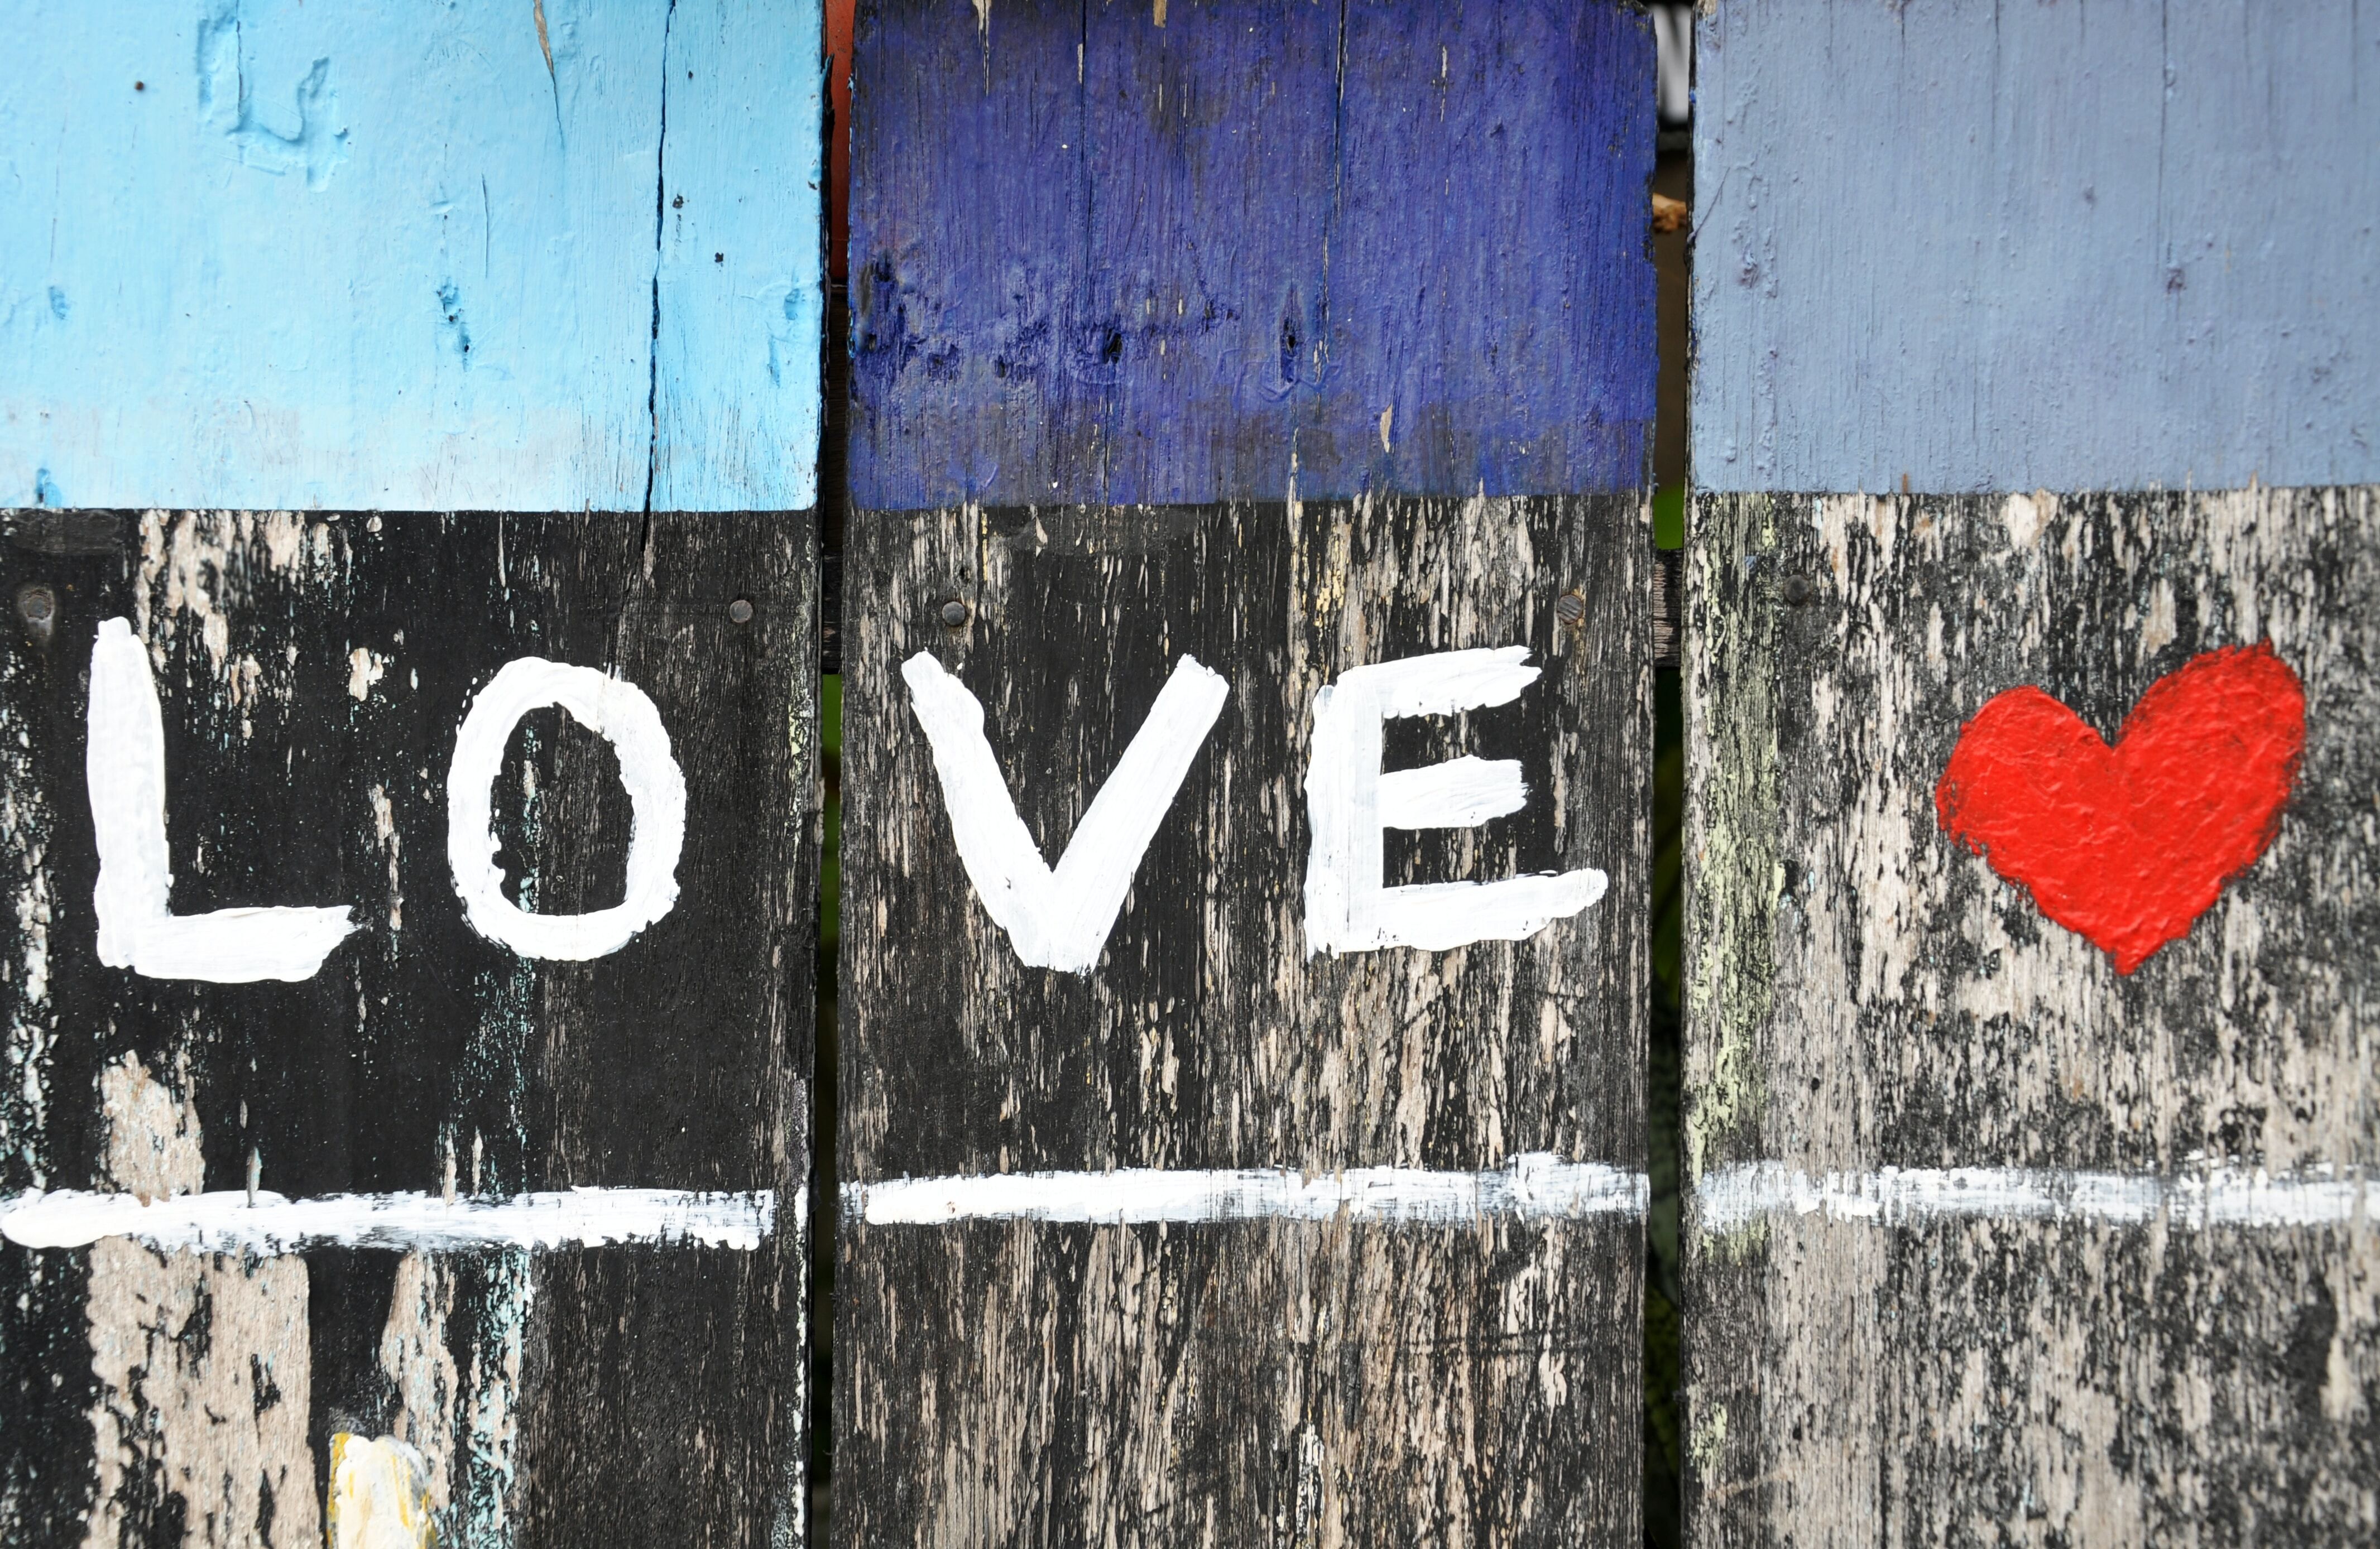 Closeup picture of a fence with LOVE painted on it. Photo by Alex Block on Unsplash.